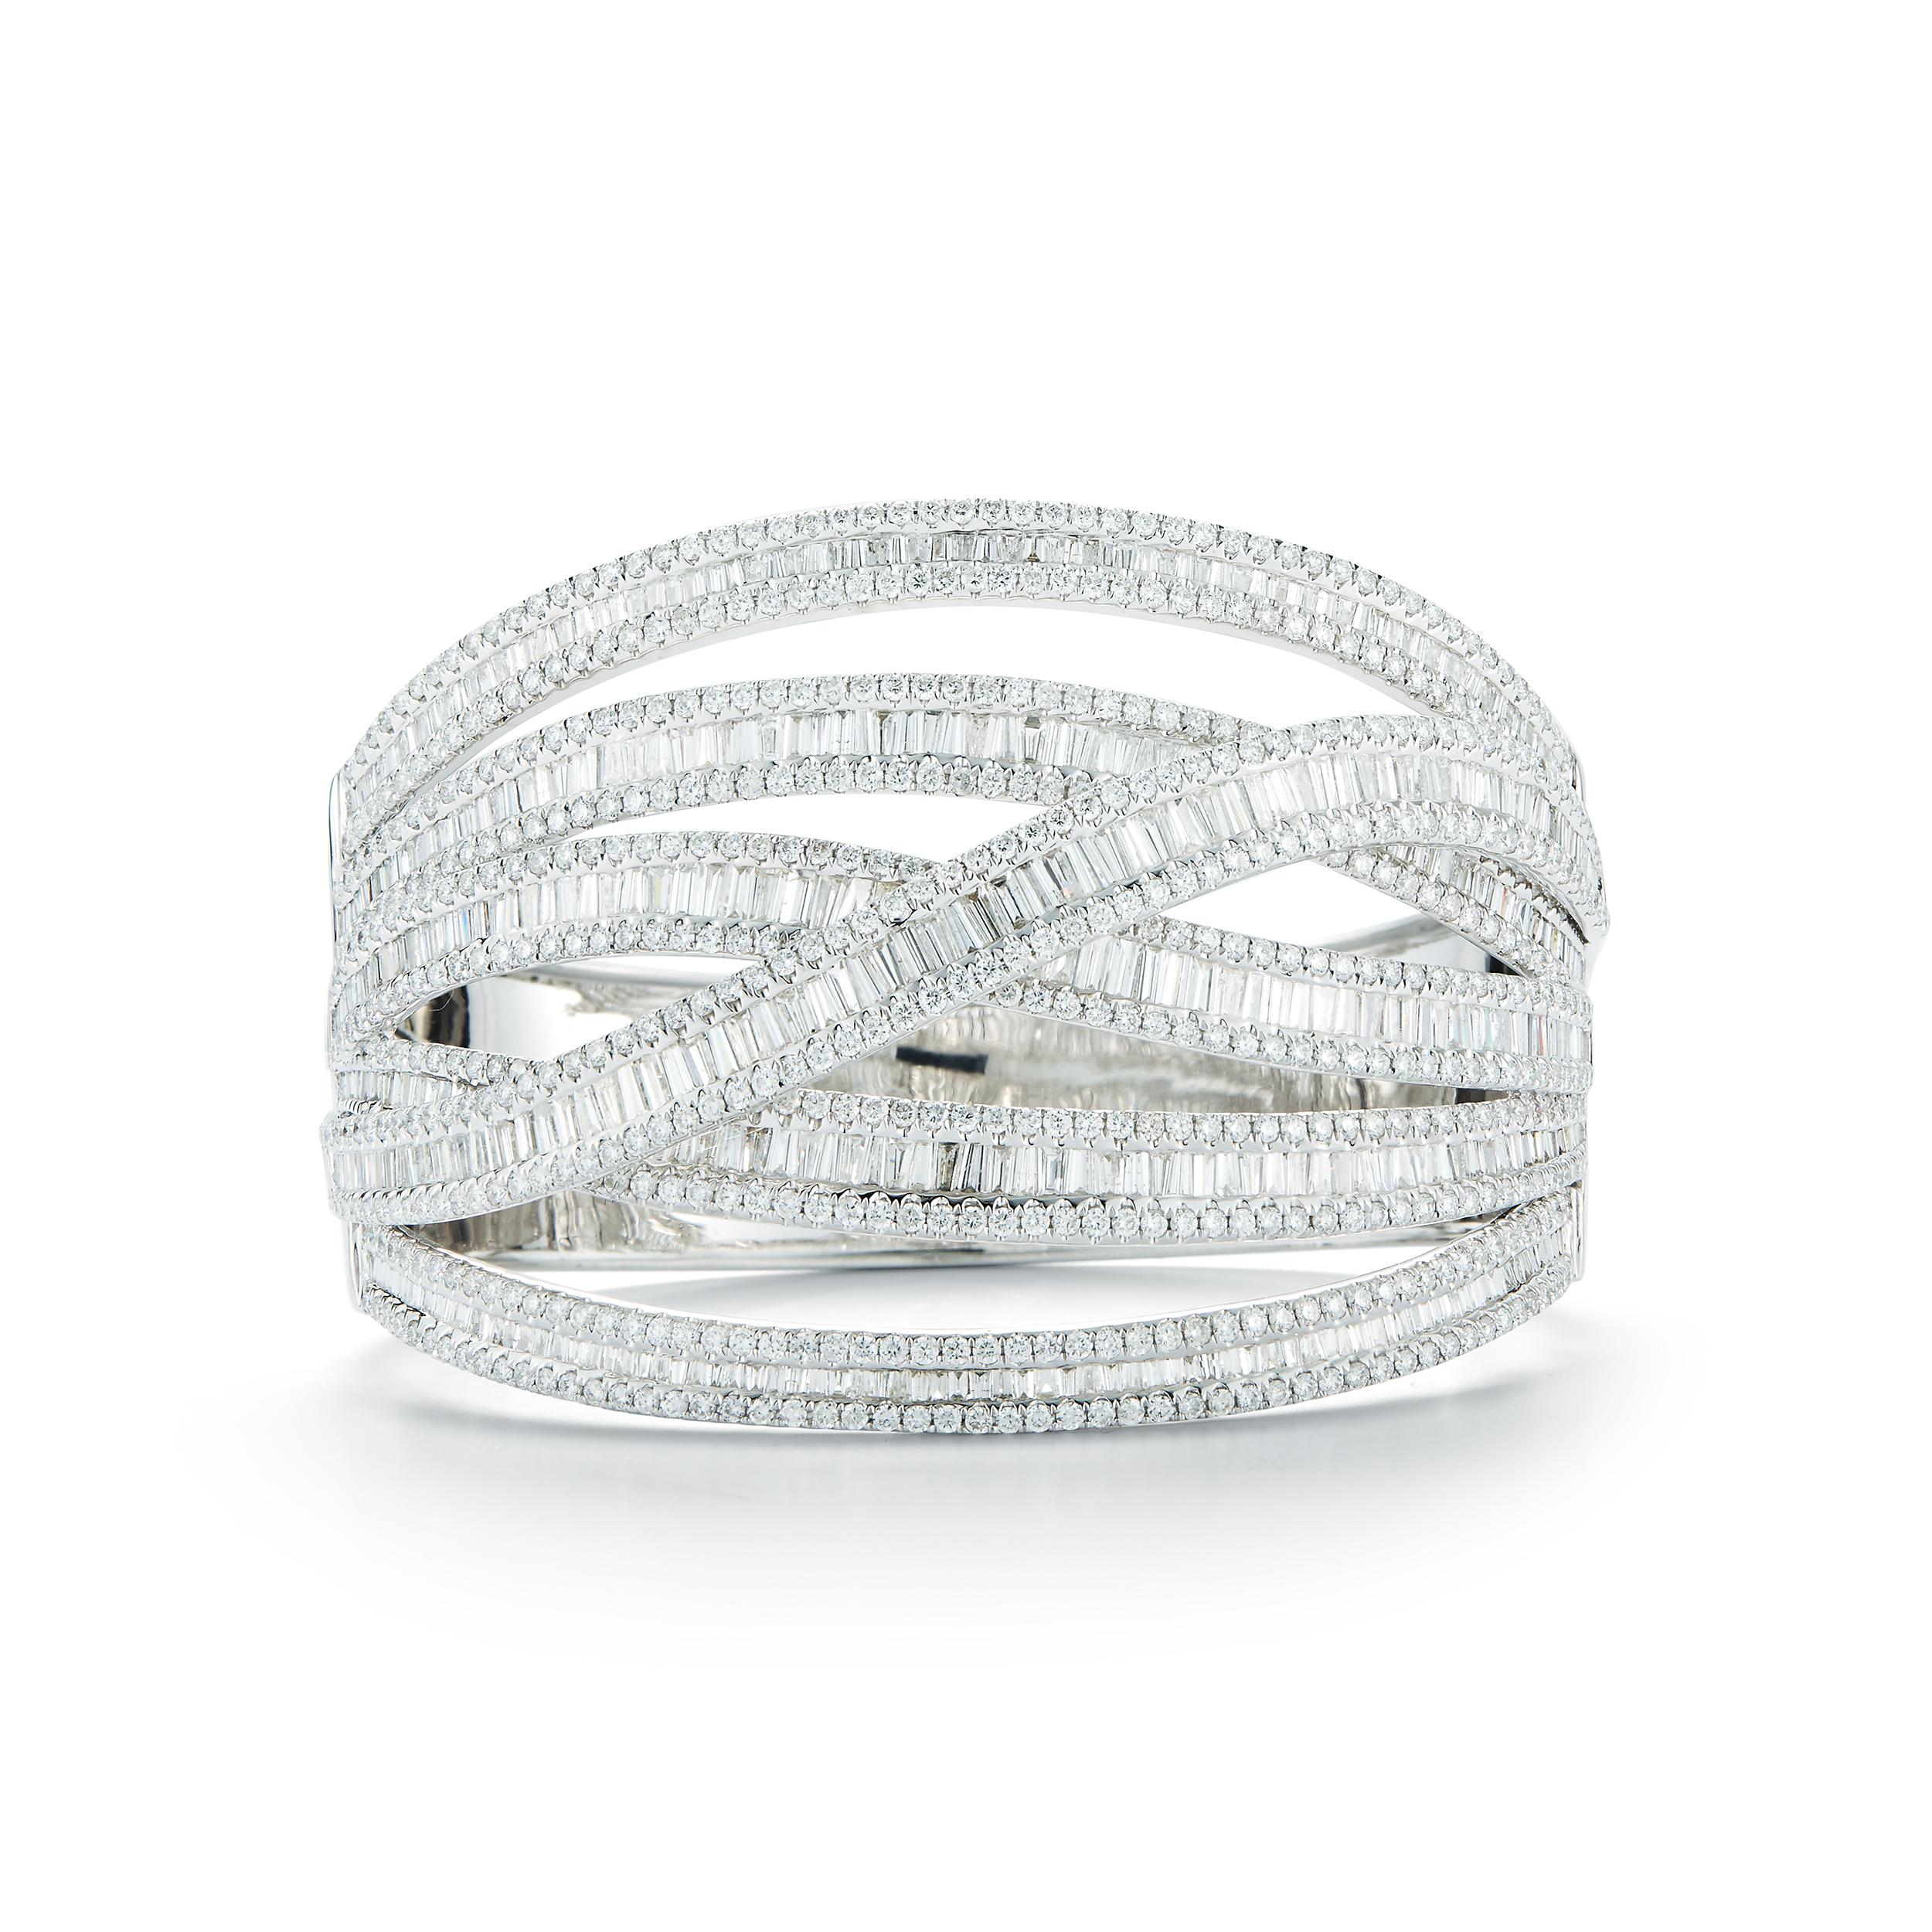 Elegant Diamond Bracelet, made of 18k white gold, set with 7.74 carat of round diamond and 5.10 carat of baguettes Diamond. All Diamonds are F color VS clarity. Total weight of Diamonds 12.84 carat.